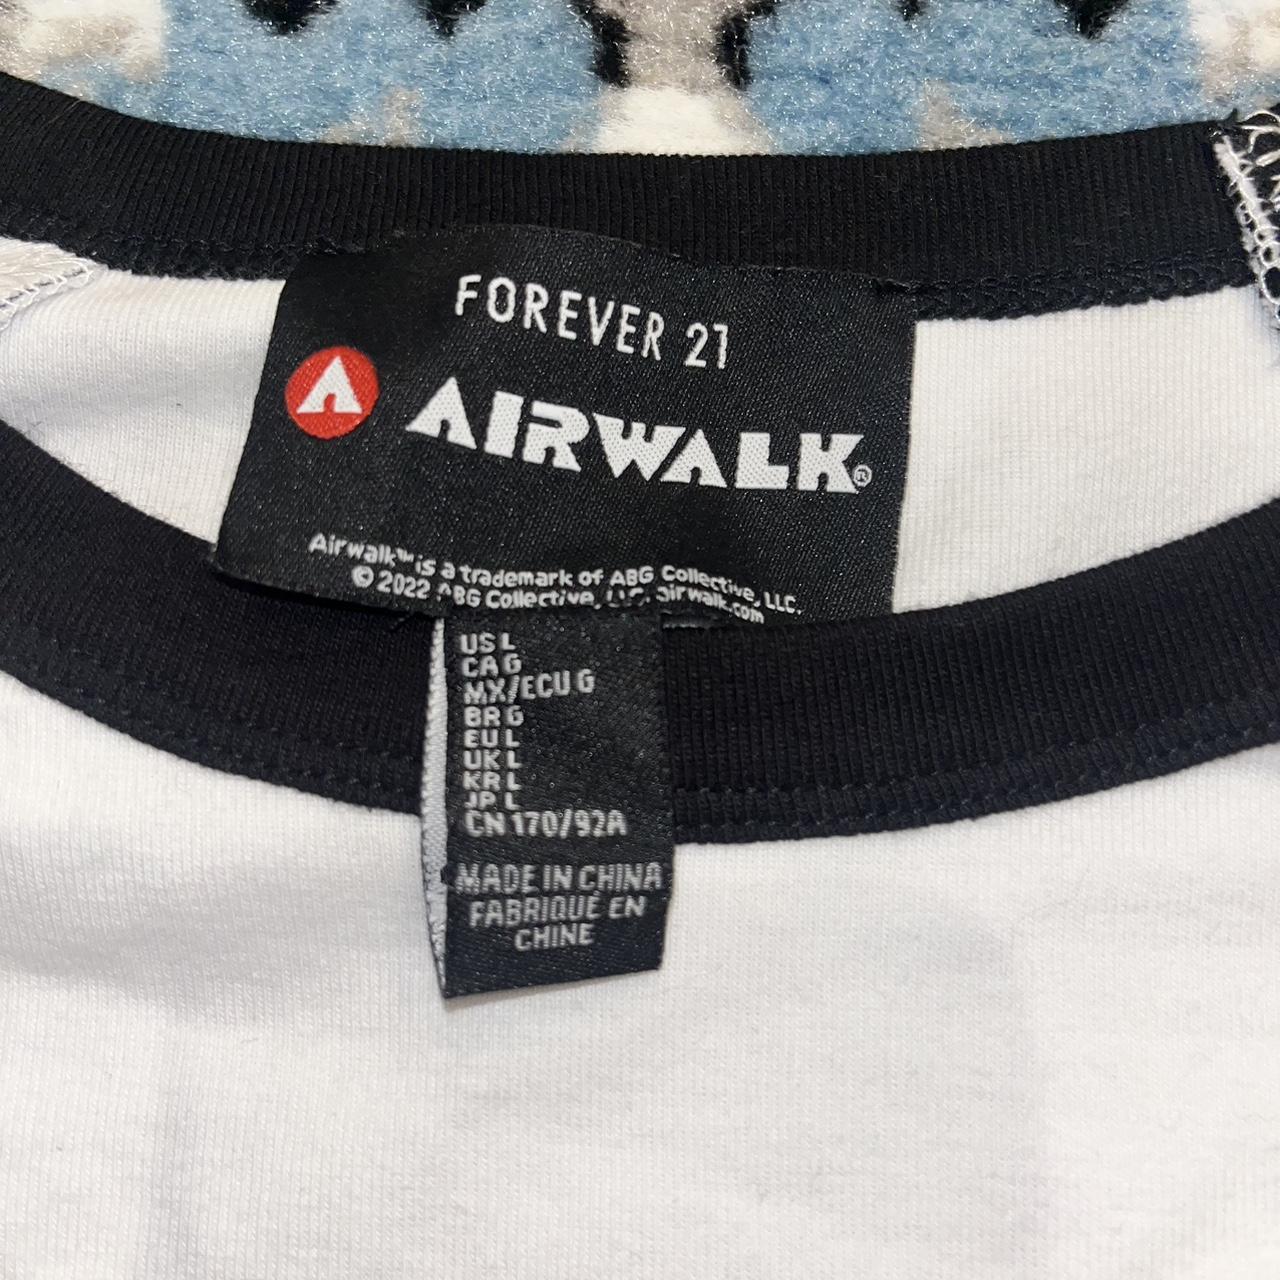 💥 FREE SHIPPING 💥 Airwalk X Forever 21 collection - Depop